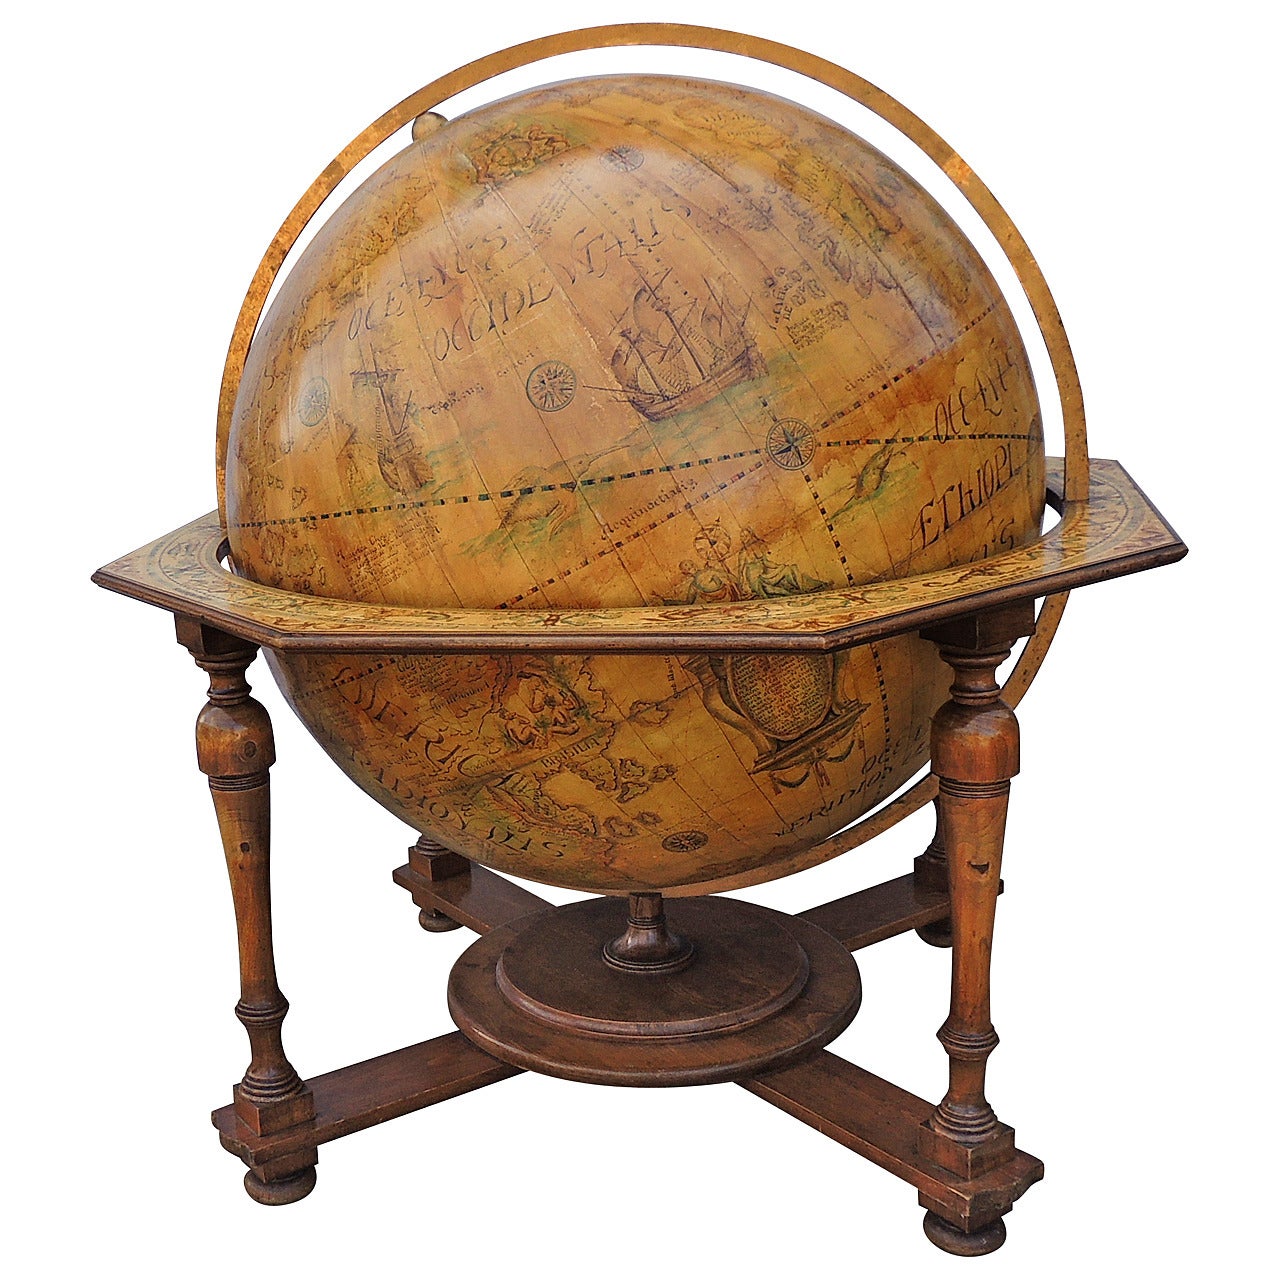 Monumental Vintage World Globe with Celestial Markings in Beautiful Pine Stand